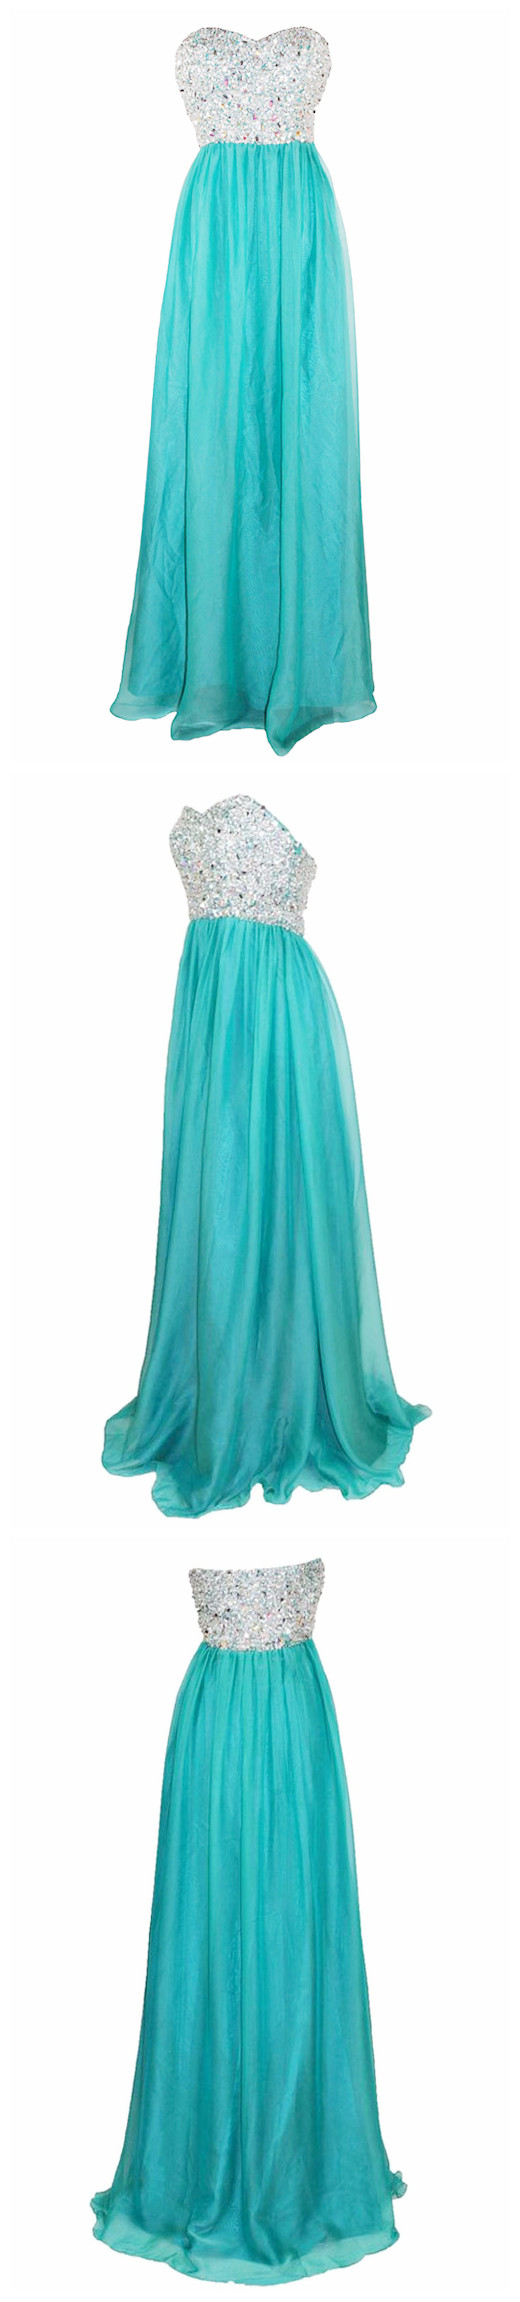 Exquisite A-line Sweetheart Long Chiffon Prom Dress With Beads